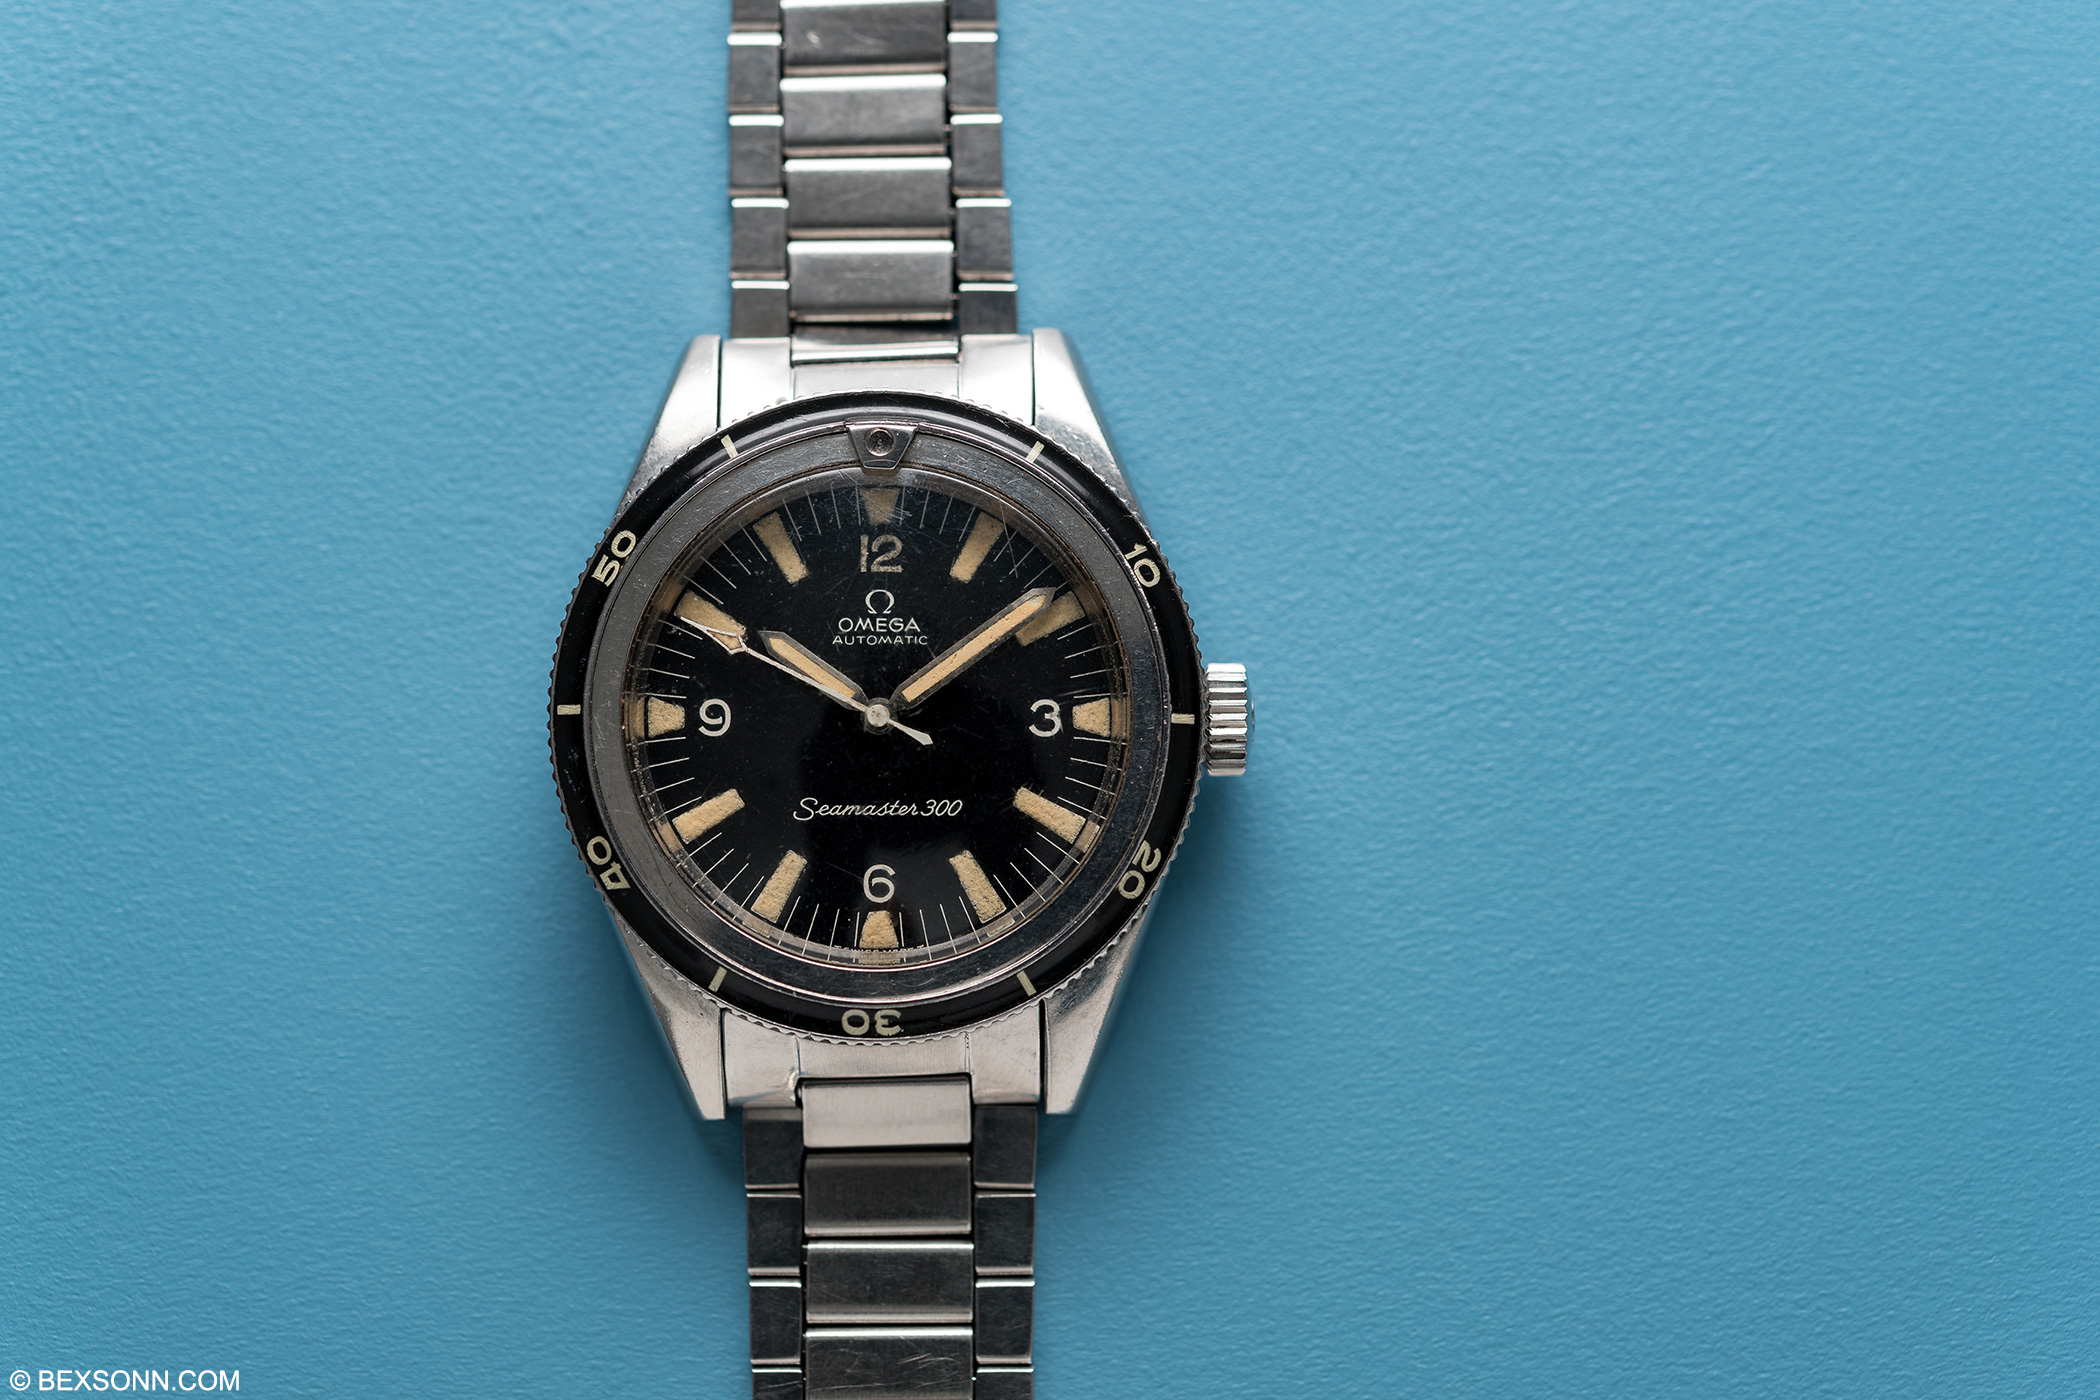 The Omega Seamaster 300: The Coveted 